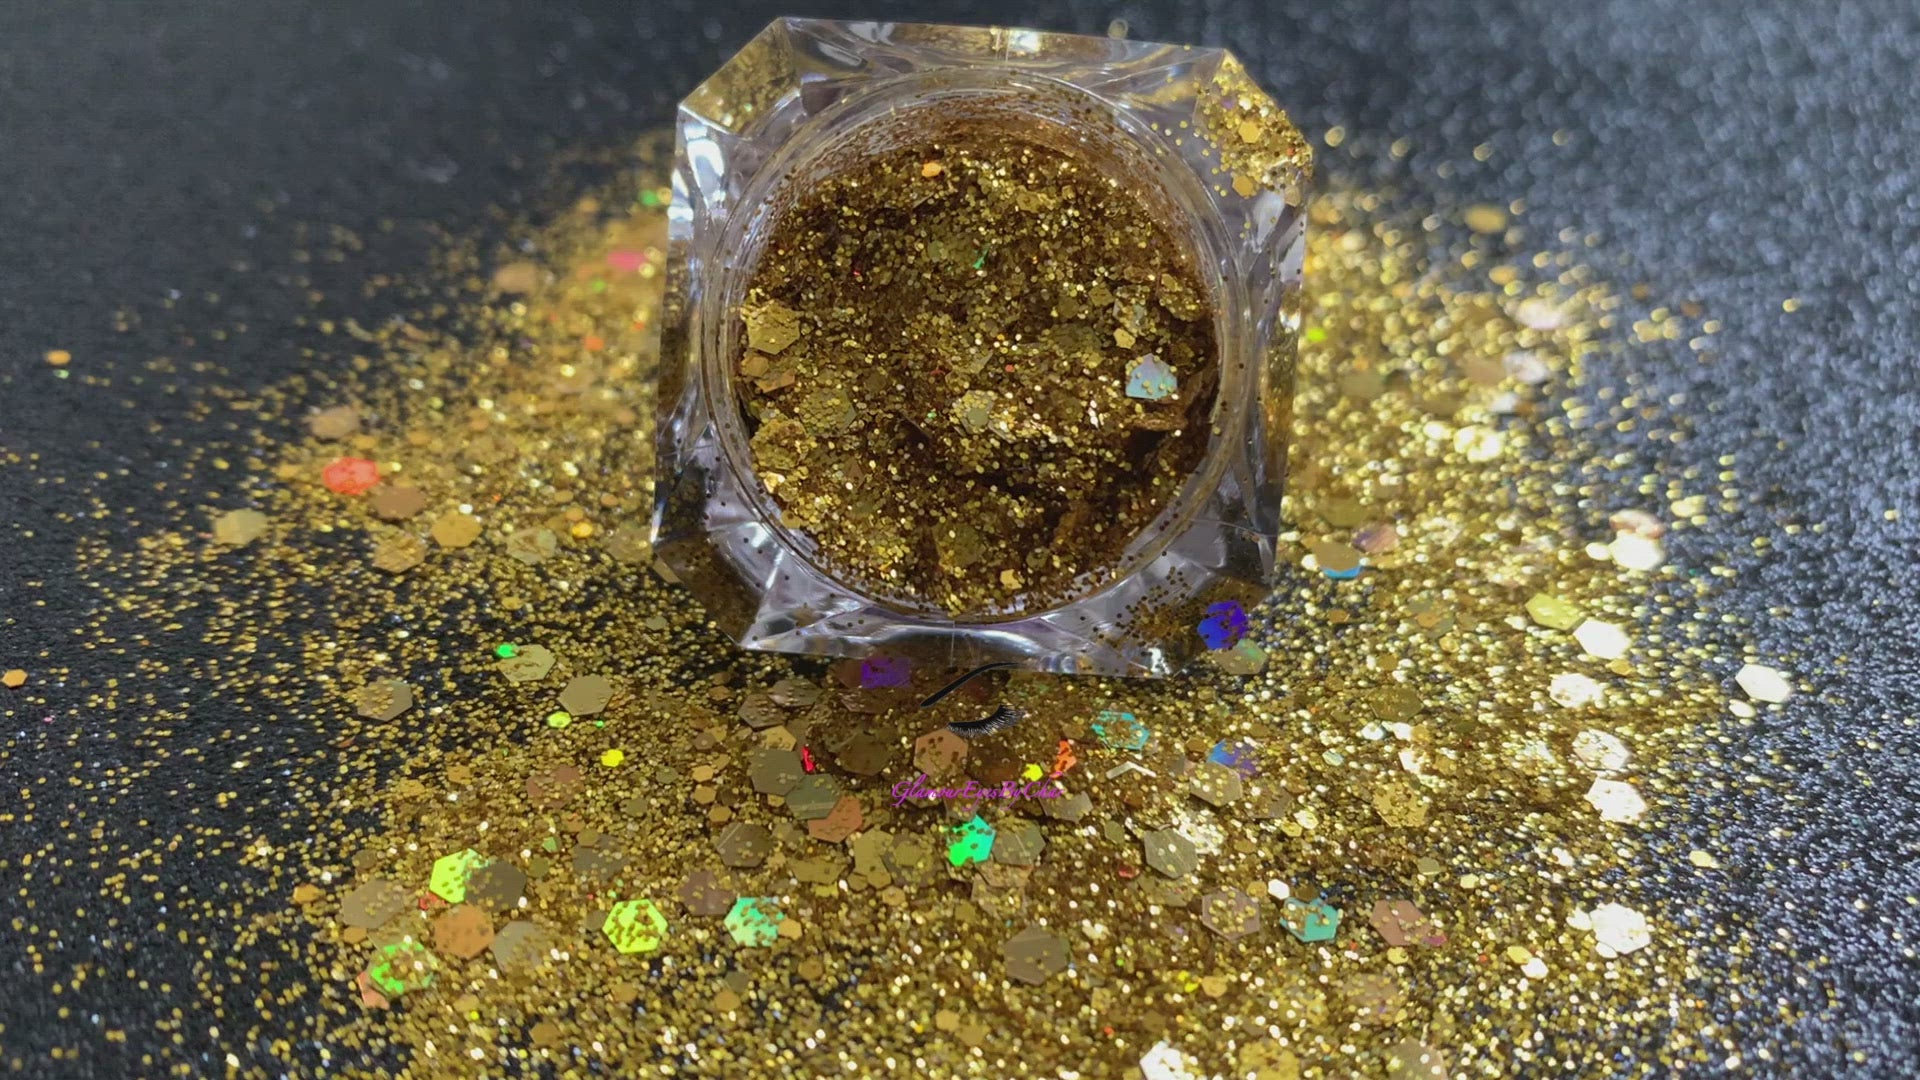 This glitter is called Gold Digger and is part of the super chunky glitter collection. It consists of true gold glitter with an extreme brilliance and a dazzling holographic sparkle. Gold Digger can be used for your face, body, hair and nails. Comes in 5g and 10g jars.